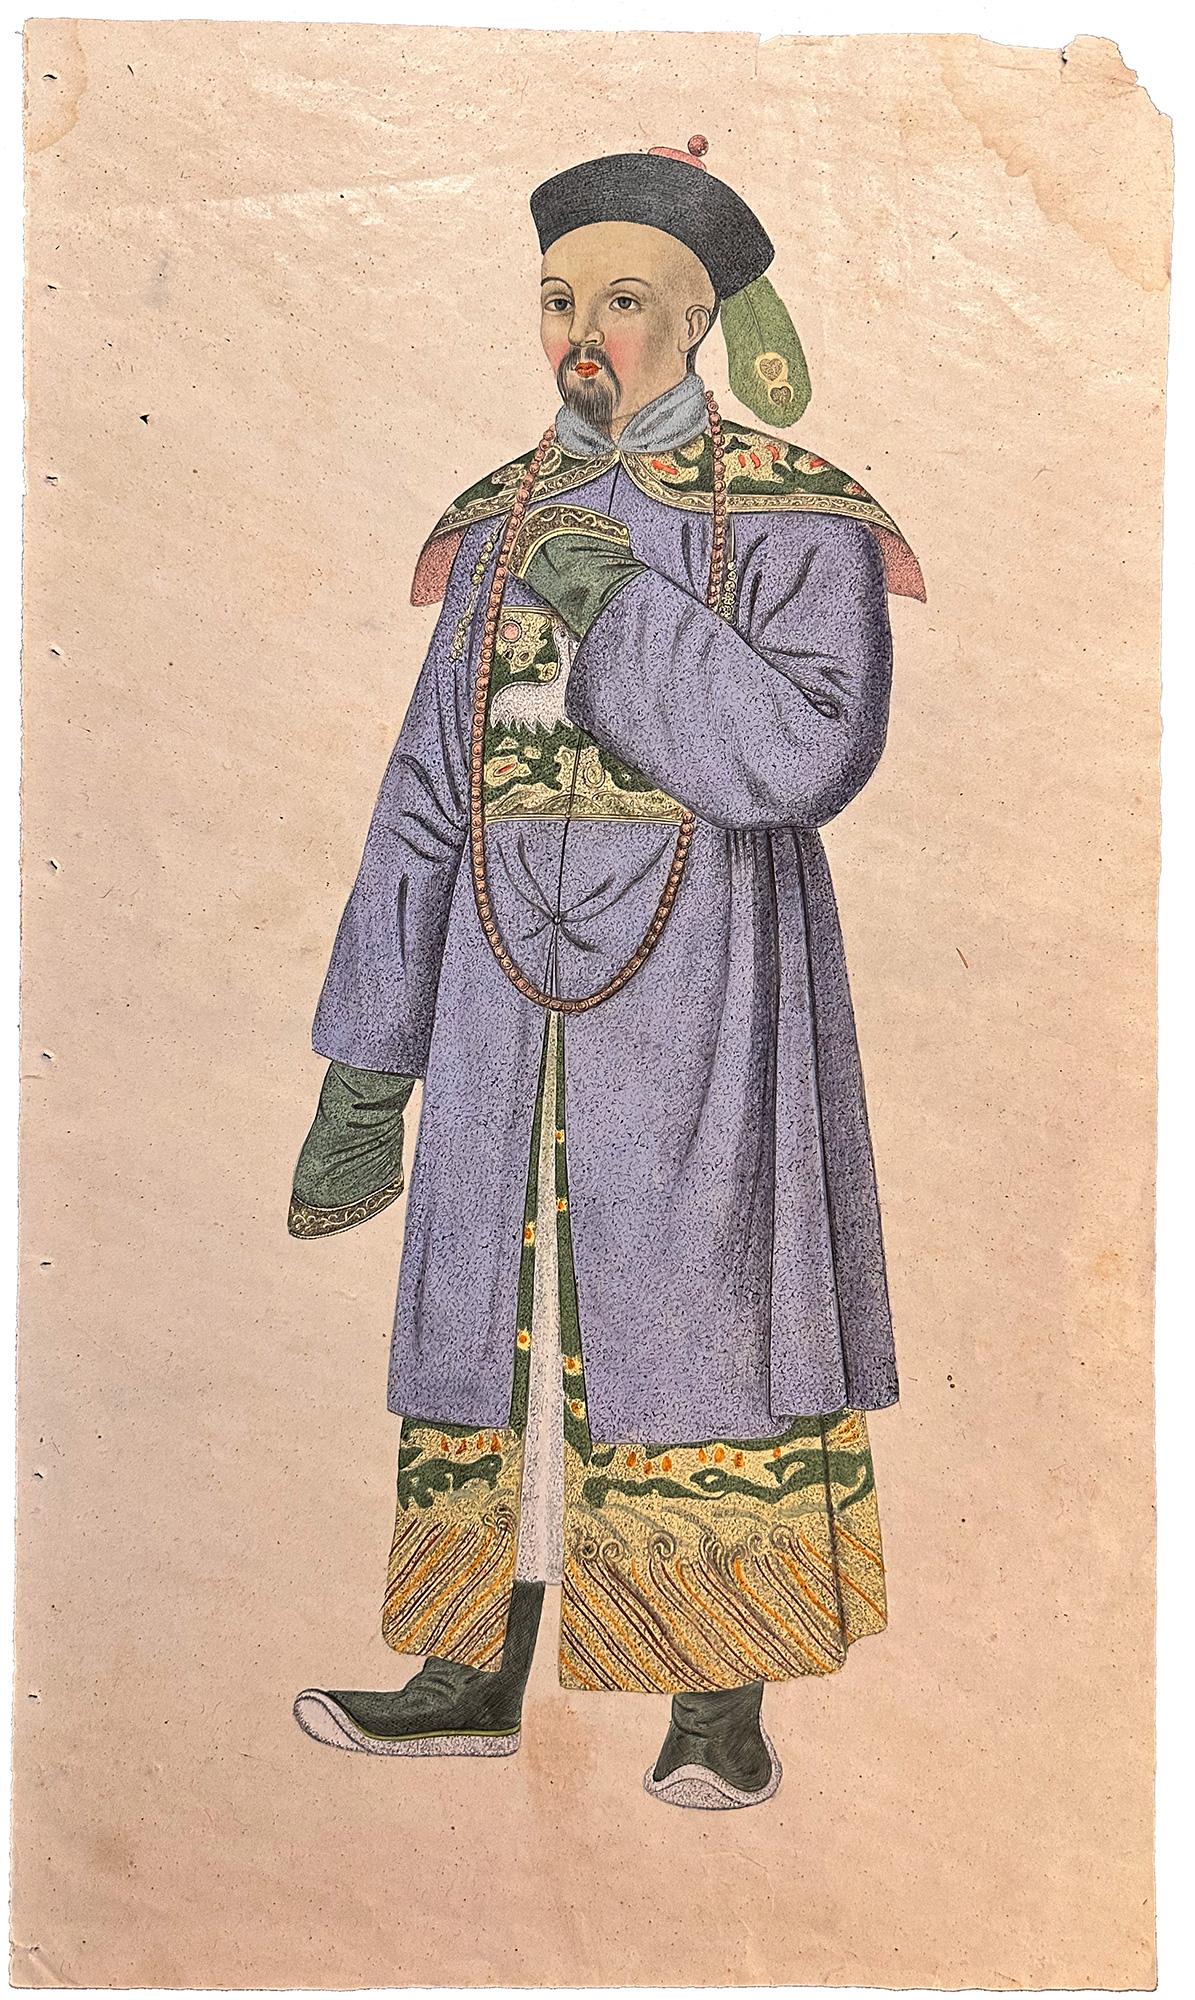 A Chinese Nobleman, from The Costume of China, by G.H. Mason, engr. John Dadley